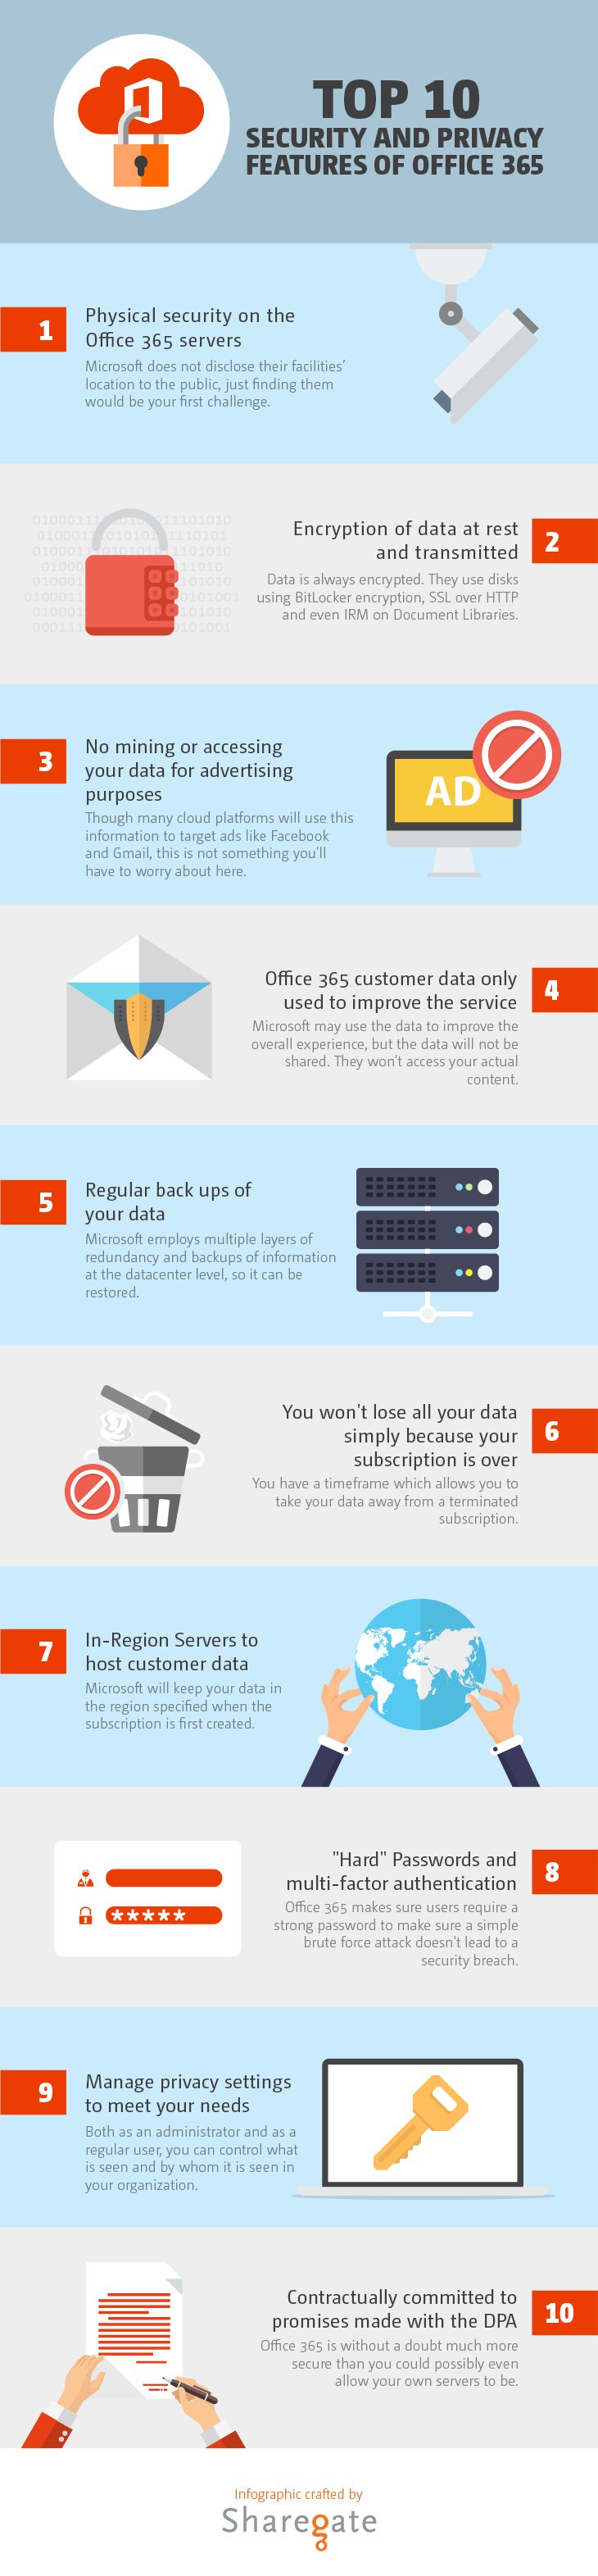 Office 365 security and privacy features infographic